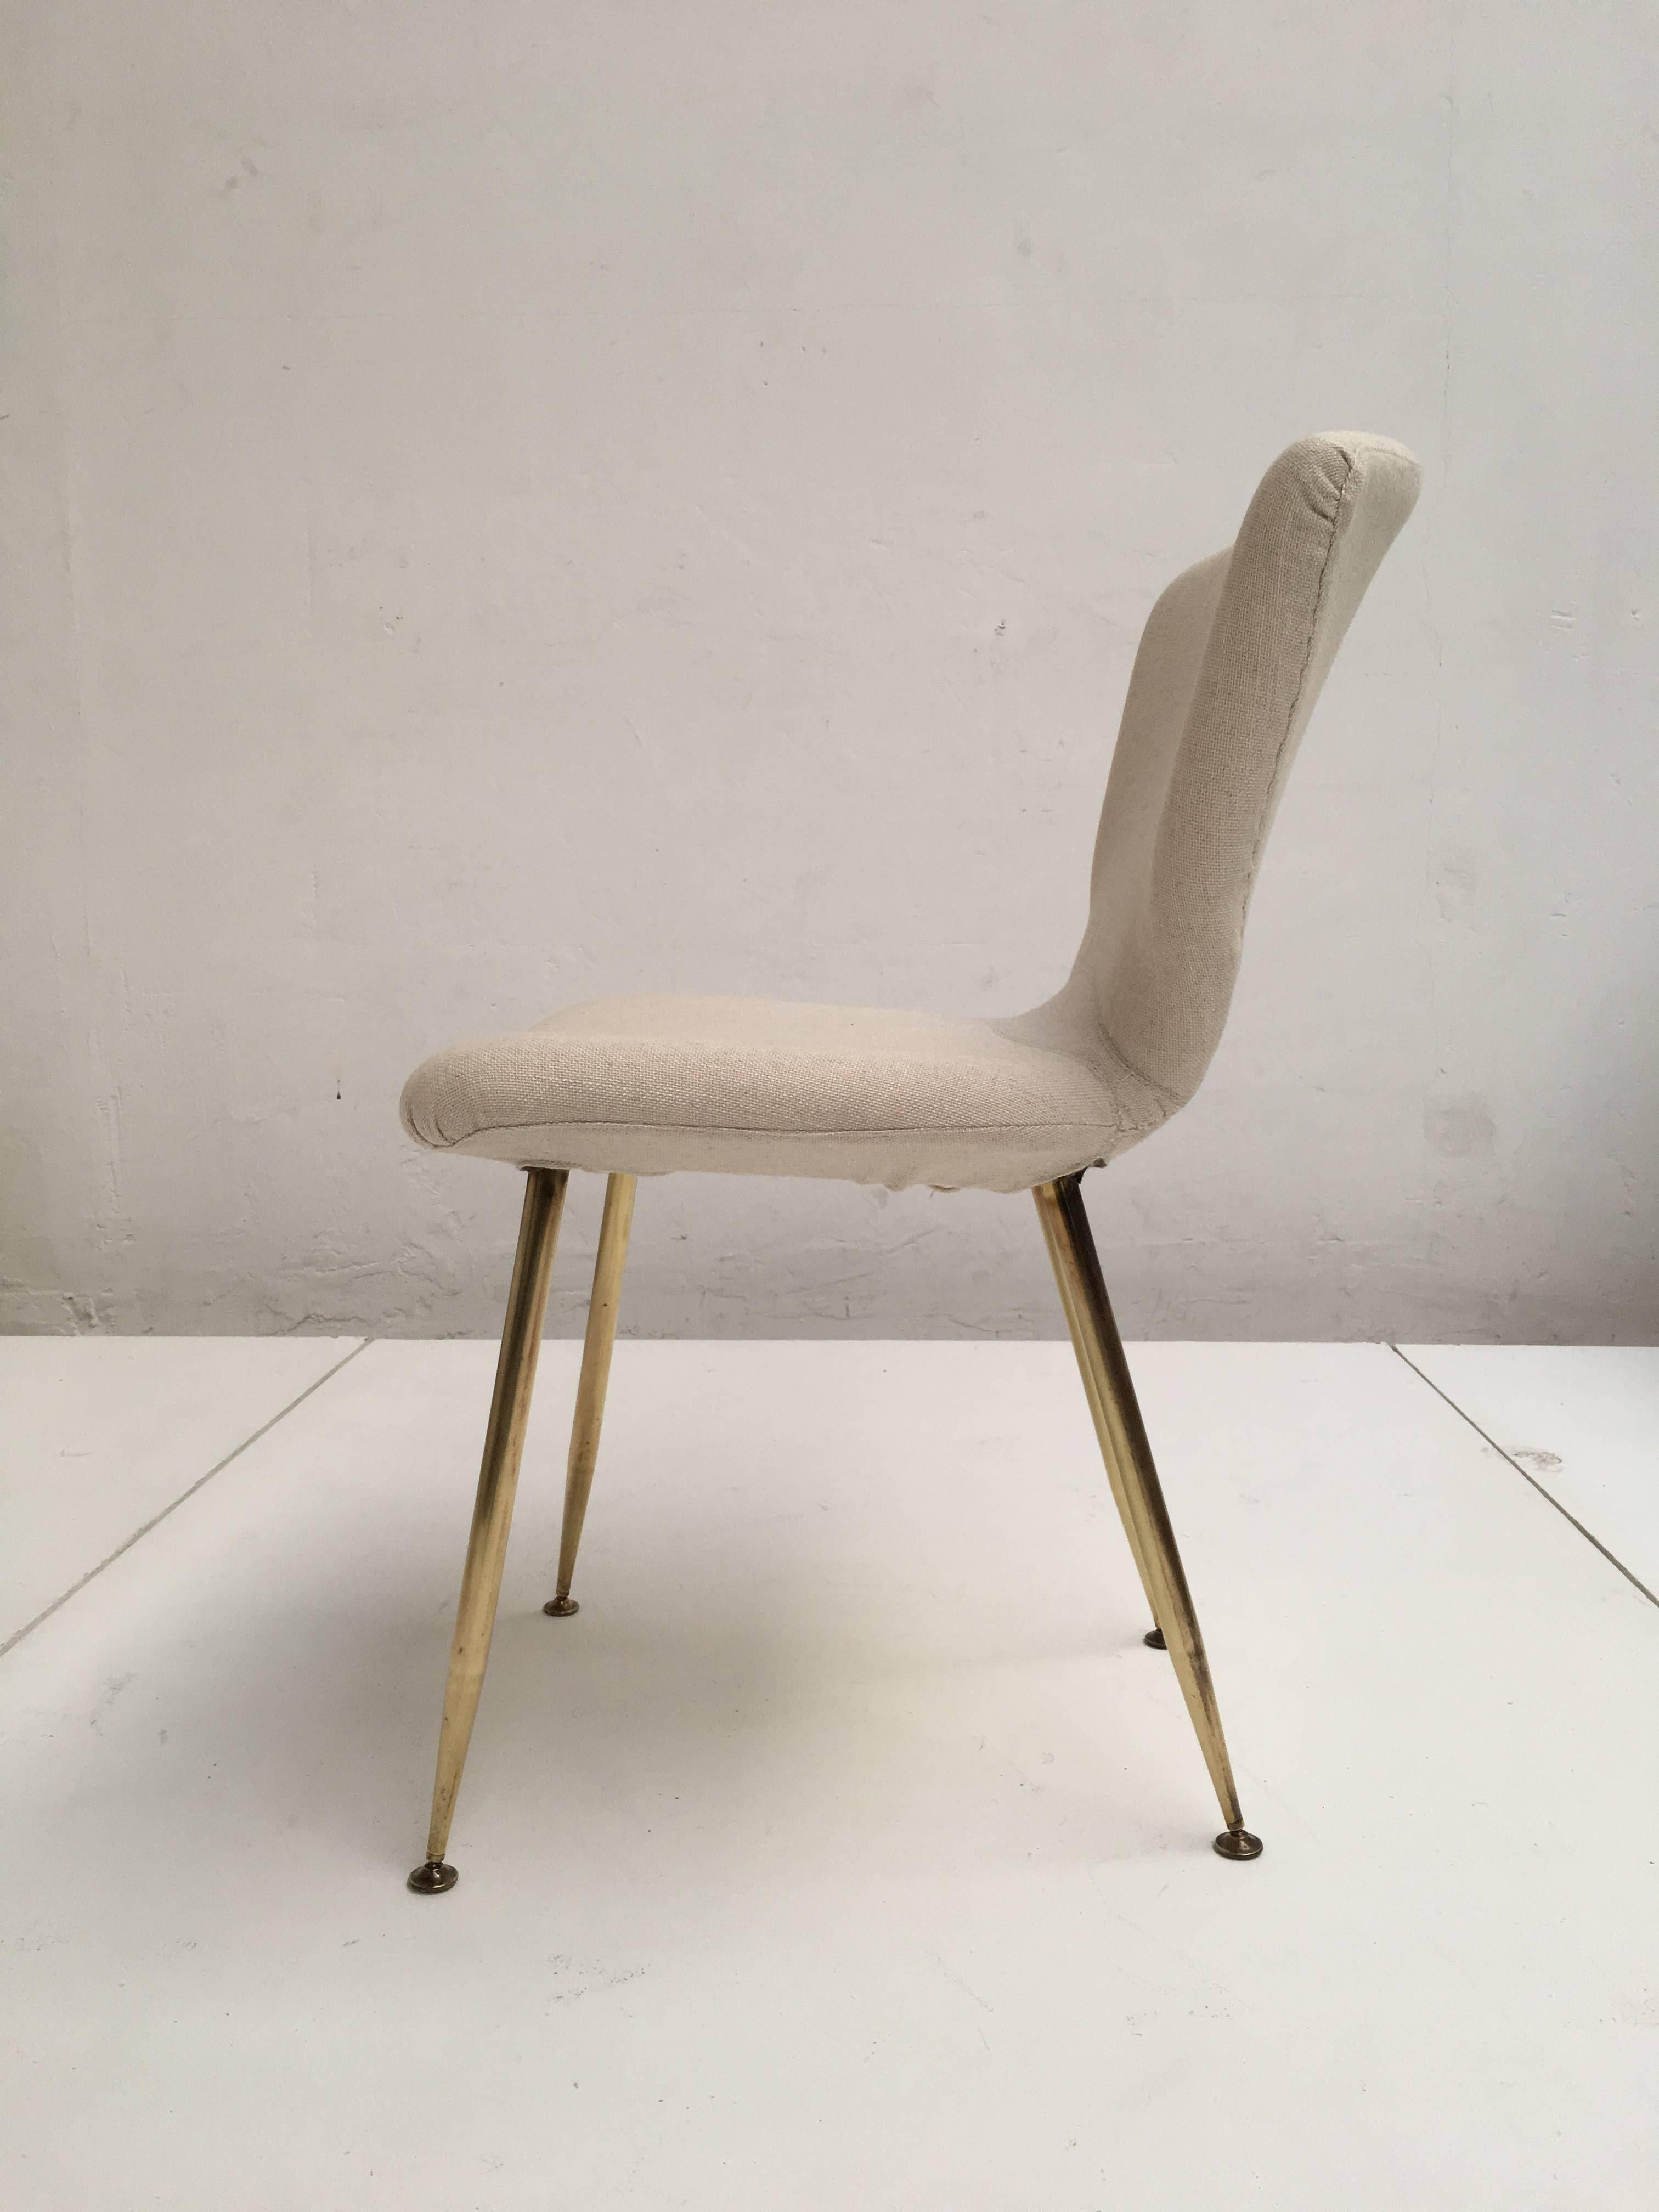 Brass 10 Dining Chairs by Louis Sognot for Arflex, 1959, brass legs, Upholstery Restored